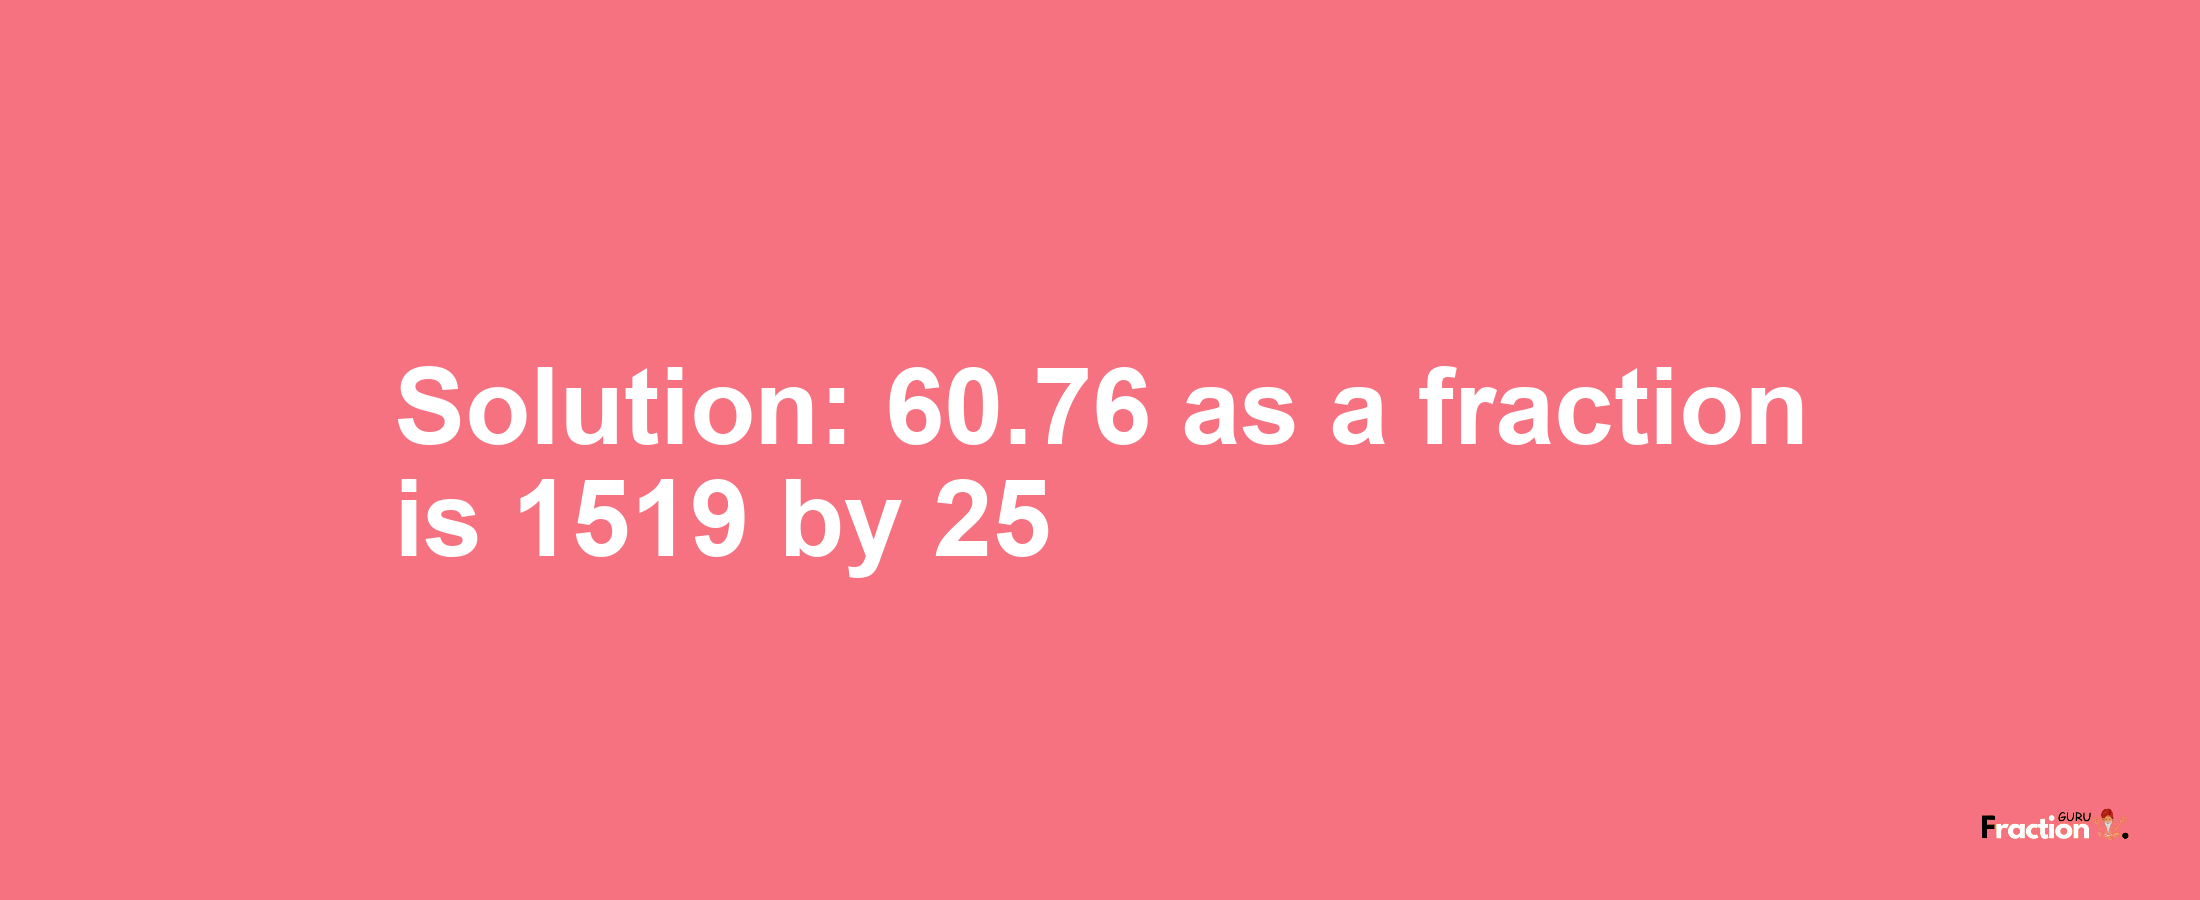 Solution:60.76 as a fraction is 1519/25